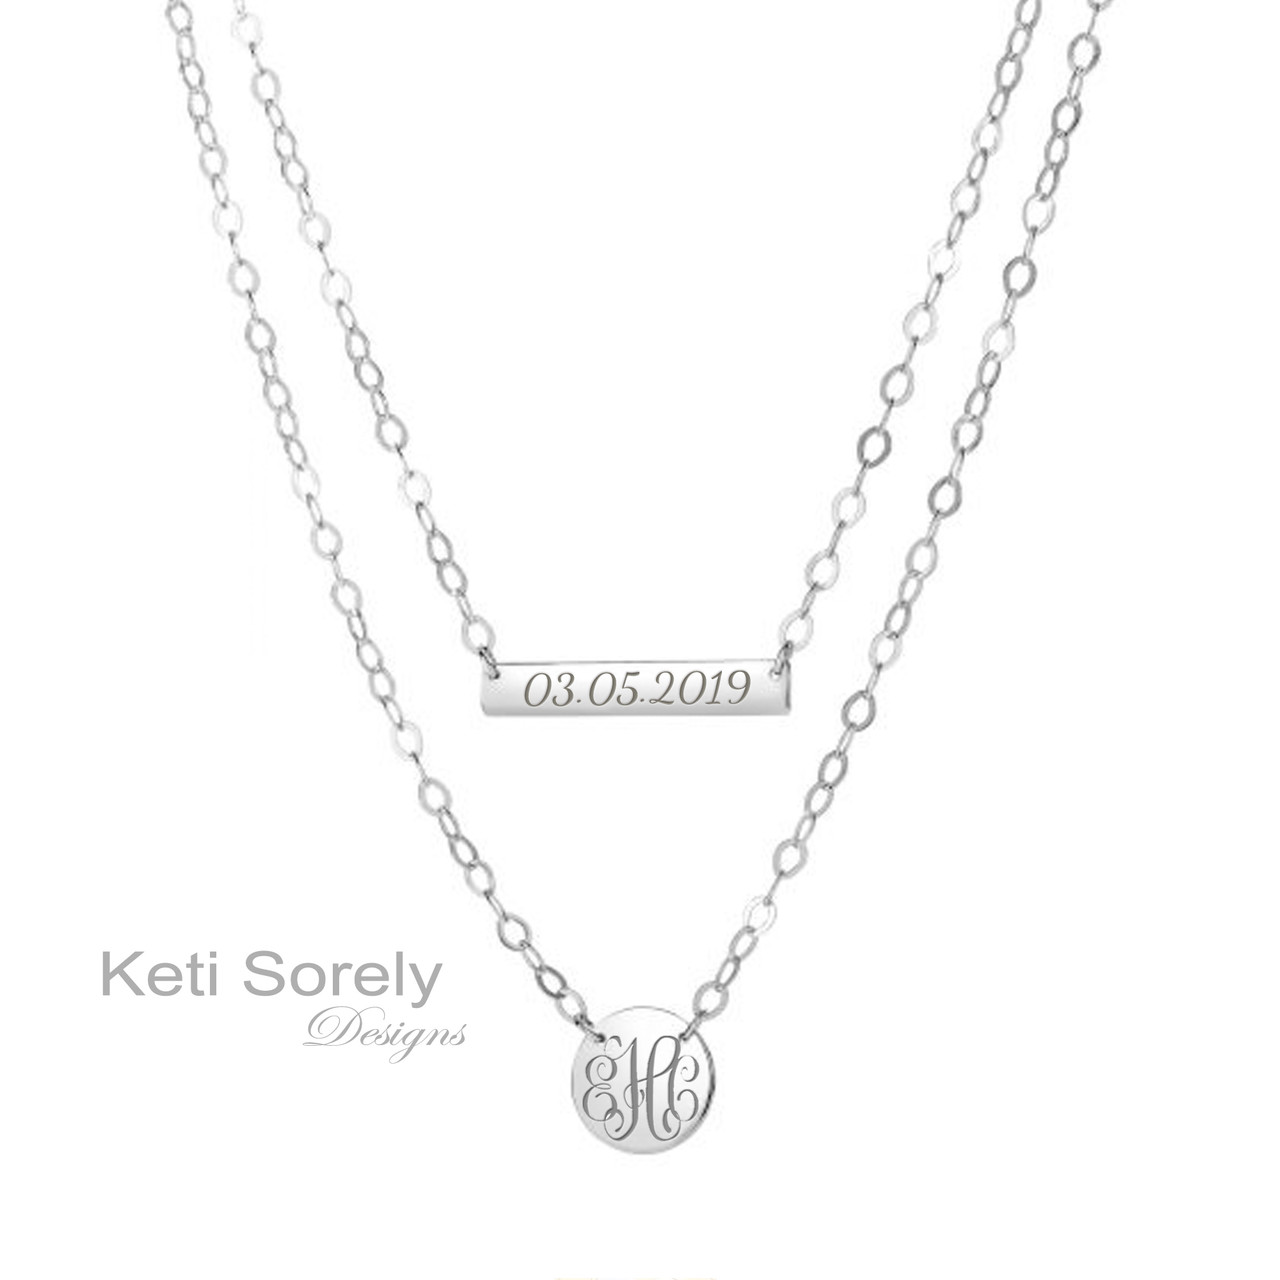 Personalized Layered Bar & Disc Necklace in Sterling Silver